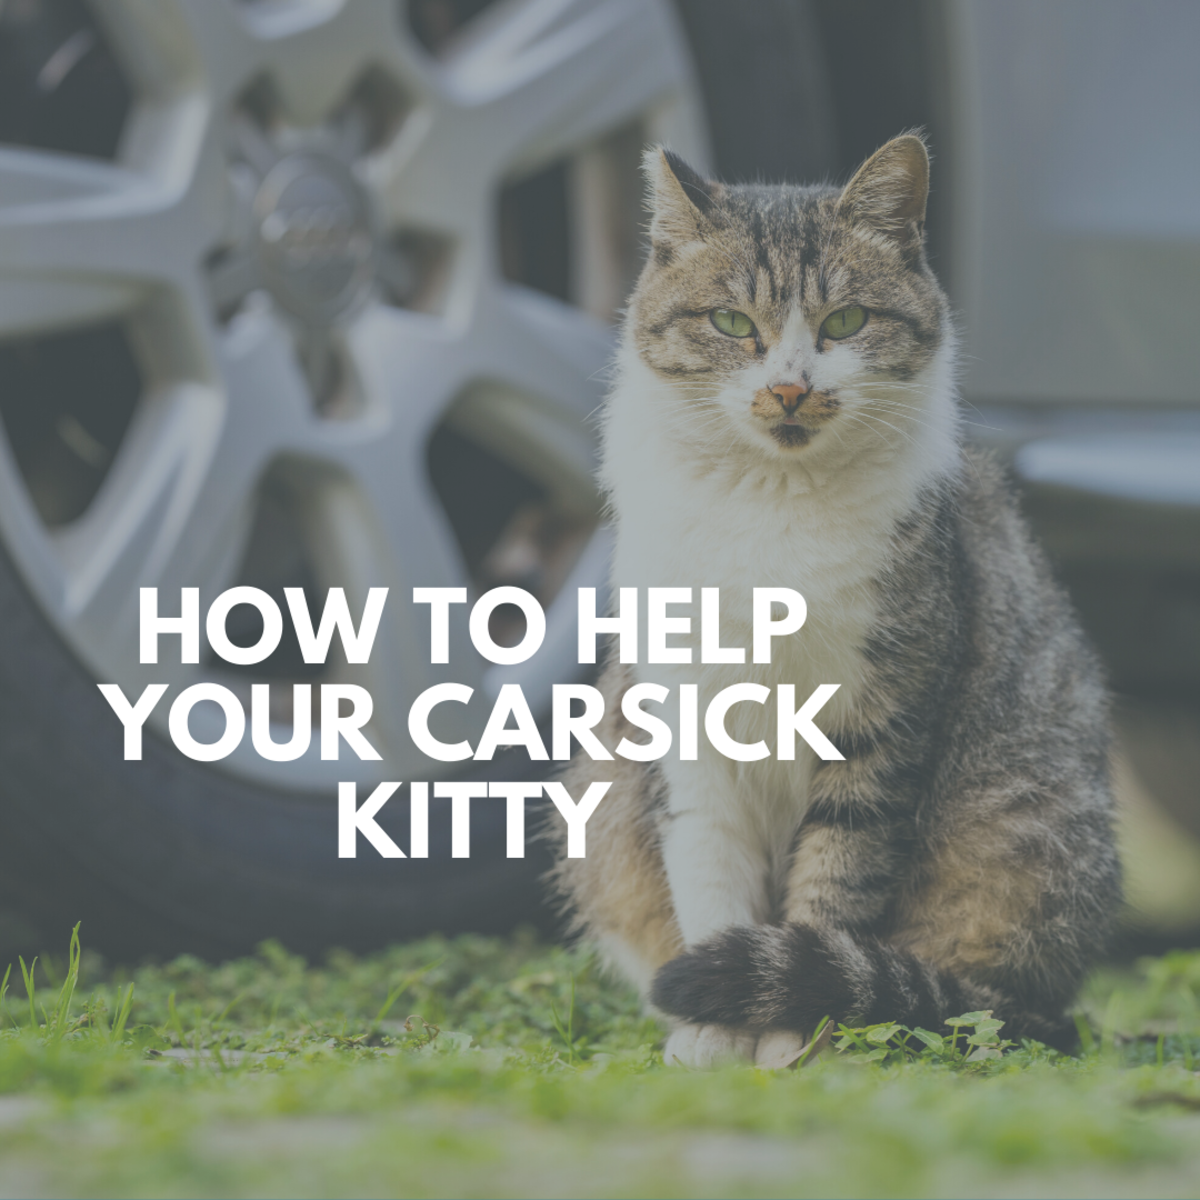 Cats Get Carsick, Too: Tips for Calming Kitty's Tummy